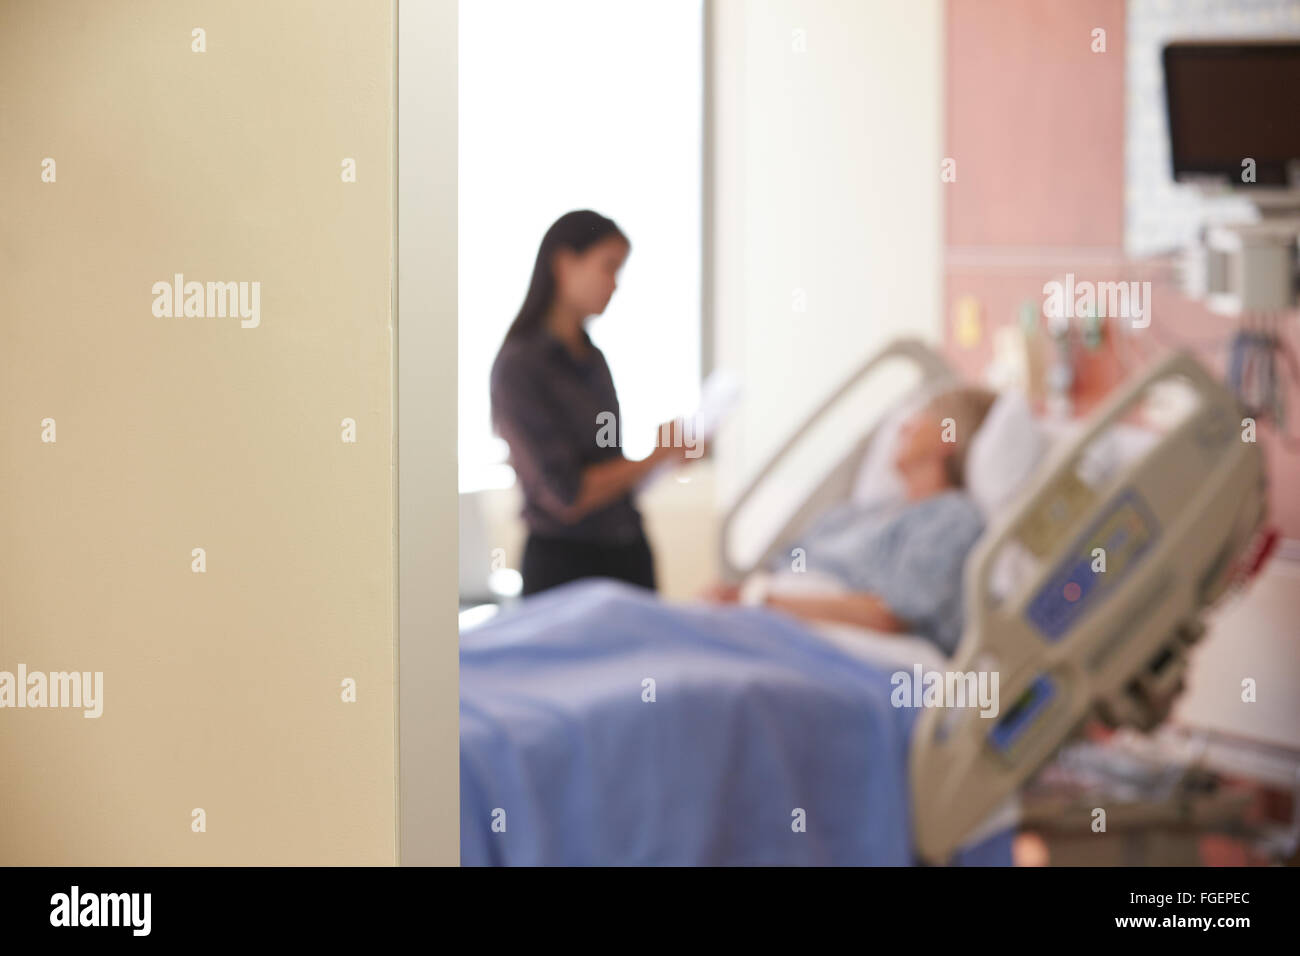 Focus On Hospital Room Sign With Doctor Talking To Patient Stock Photo